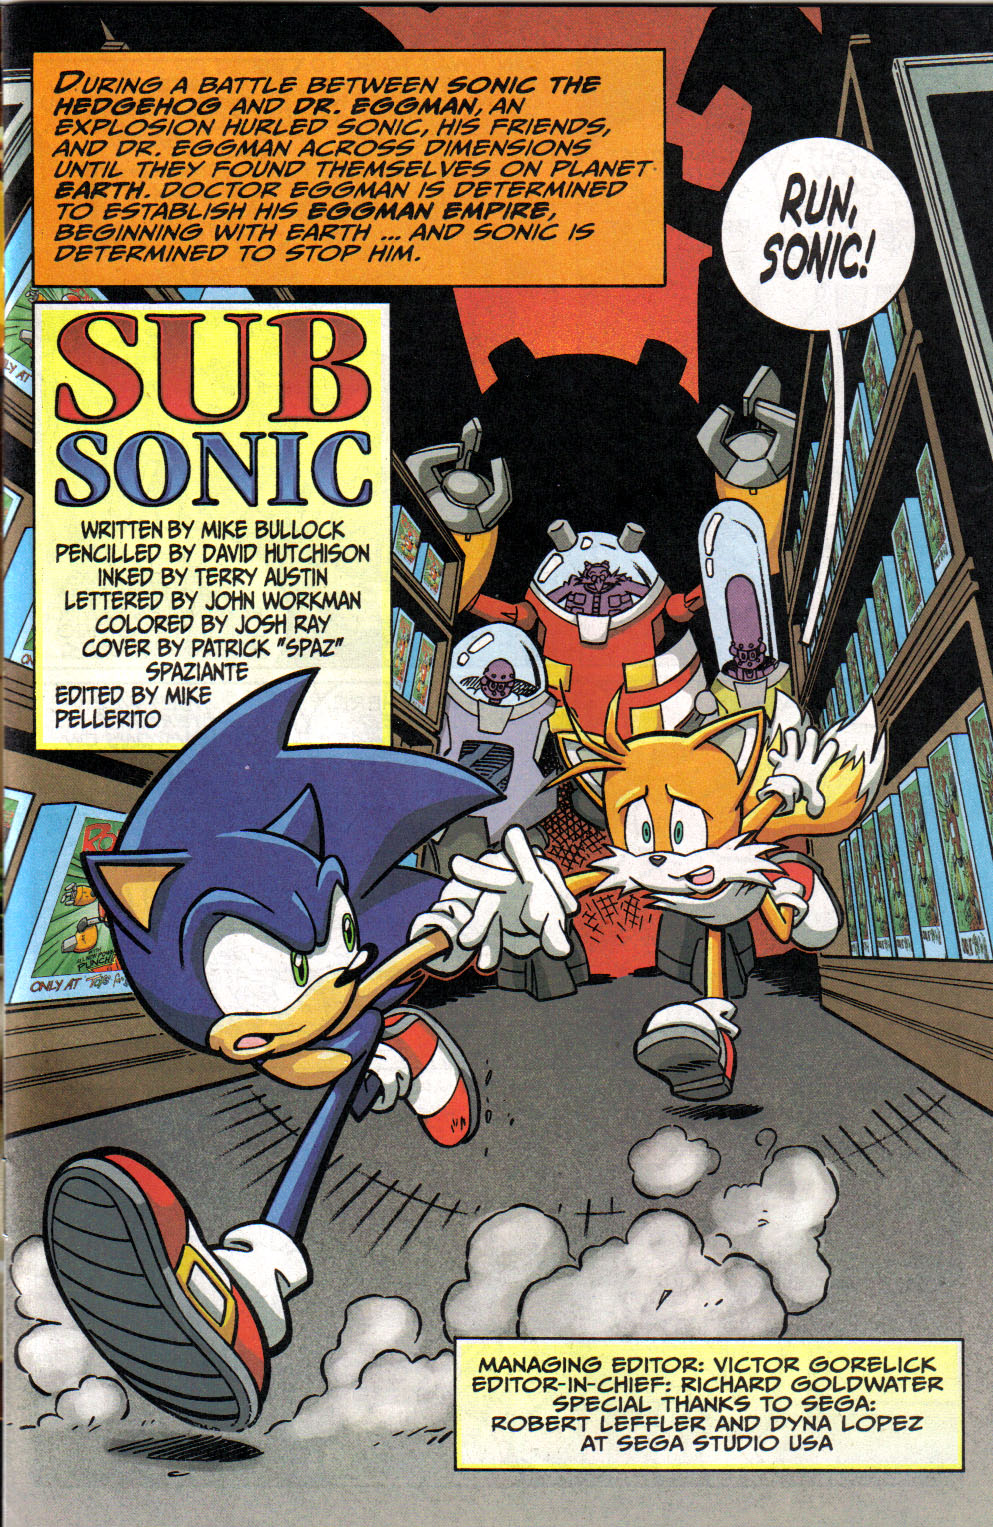 Sonic X - July 2007 Page 1